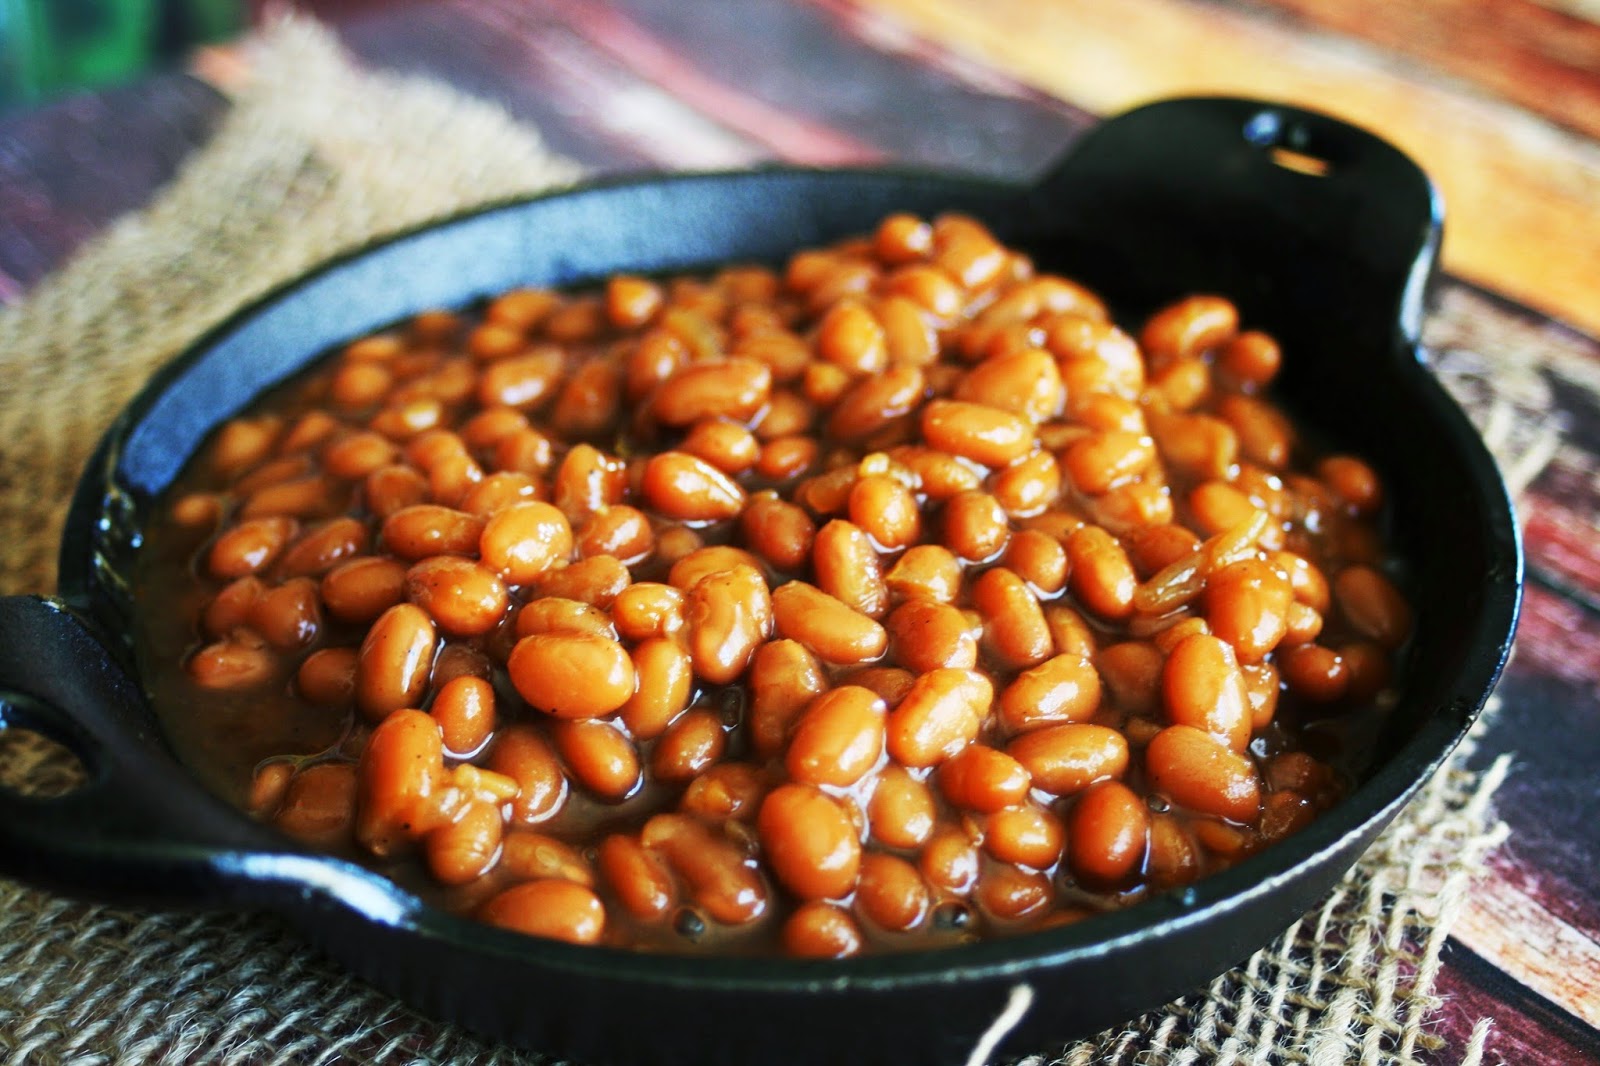 I Thee Cook: Super Easy Carmelized Onion and Bourbon Baked Beans